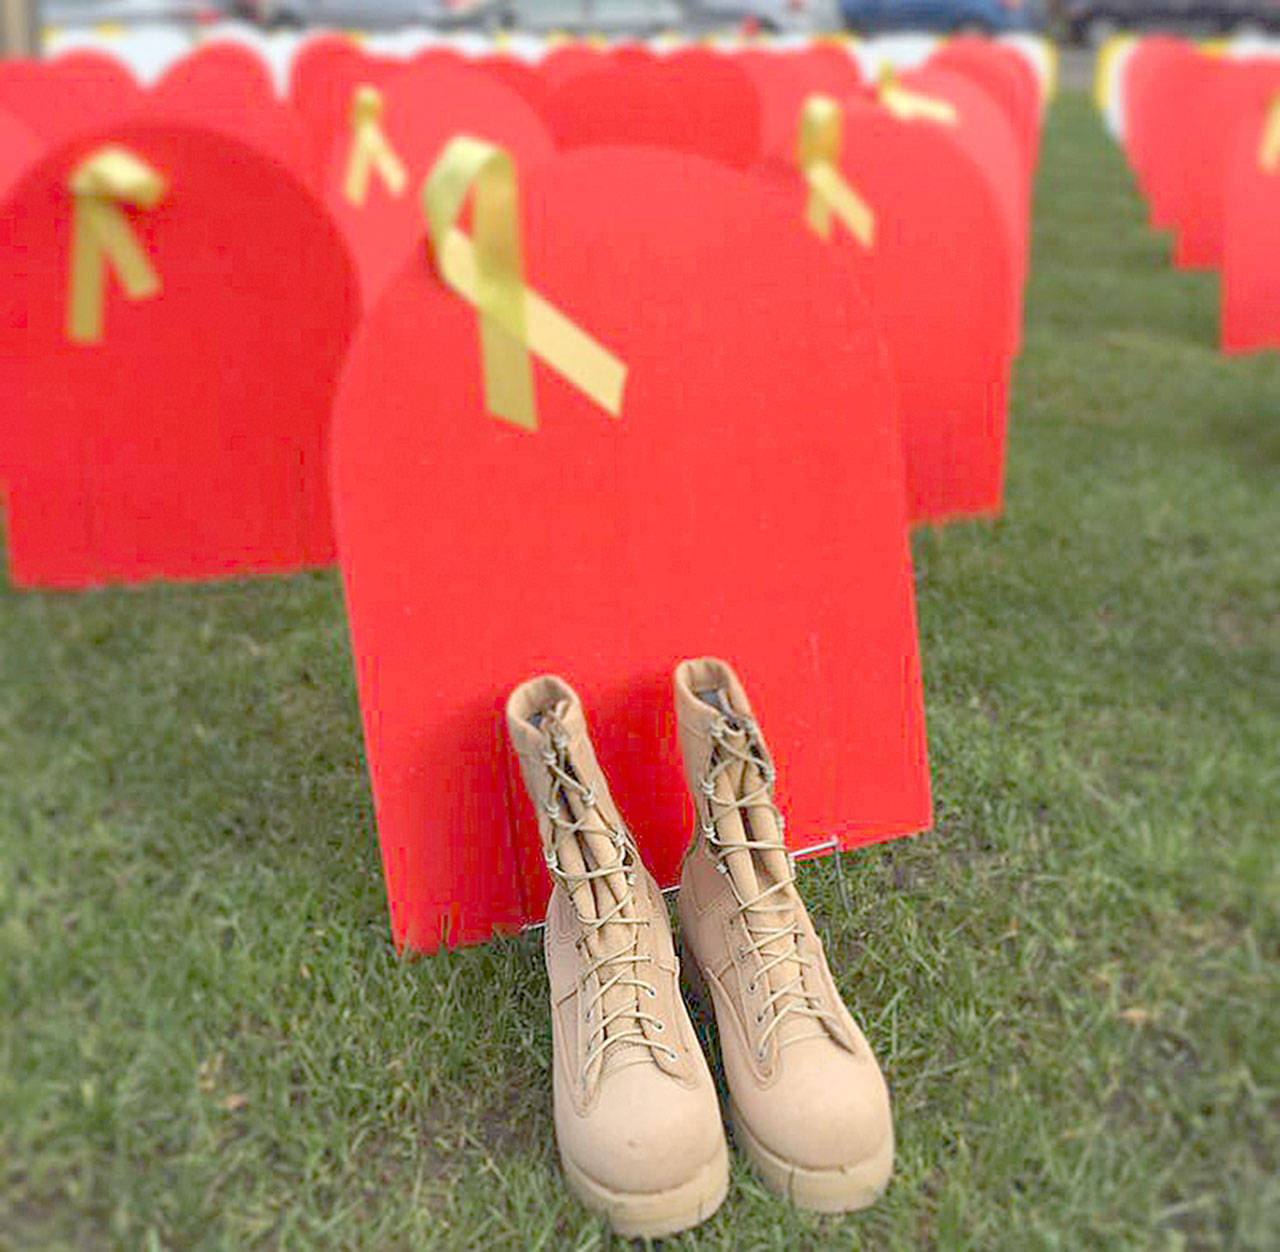 Photo Courtesy of Forefront — This is part of a display of cardboard headstones at the state capital where Forefront was lobby for legislation supporting suicide prevention. A similar display will be installed at Franklin Field in Aberdeen Sept. 10